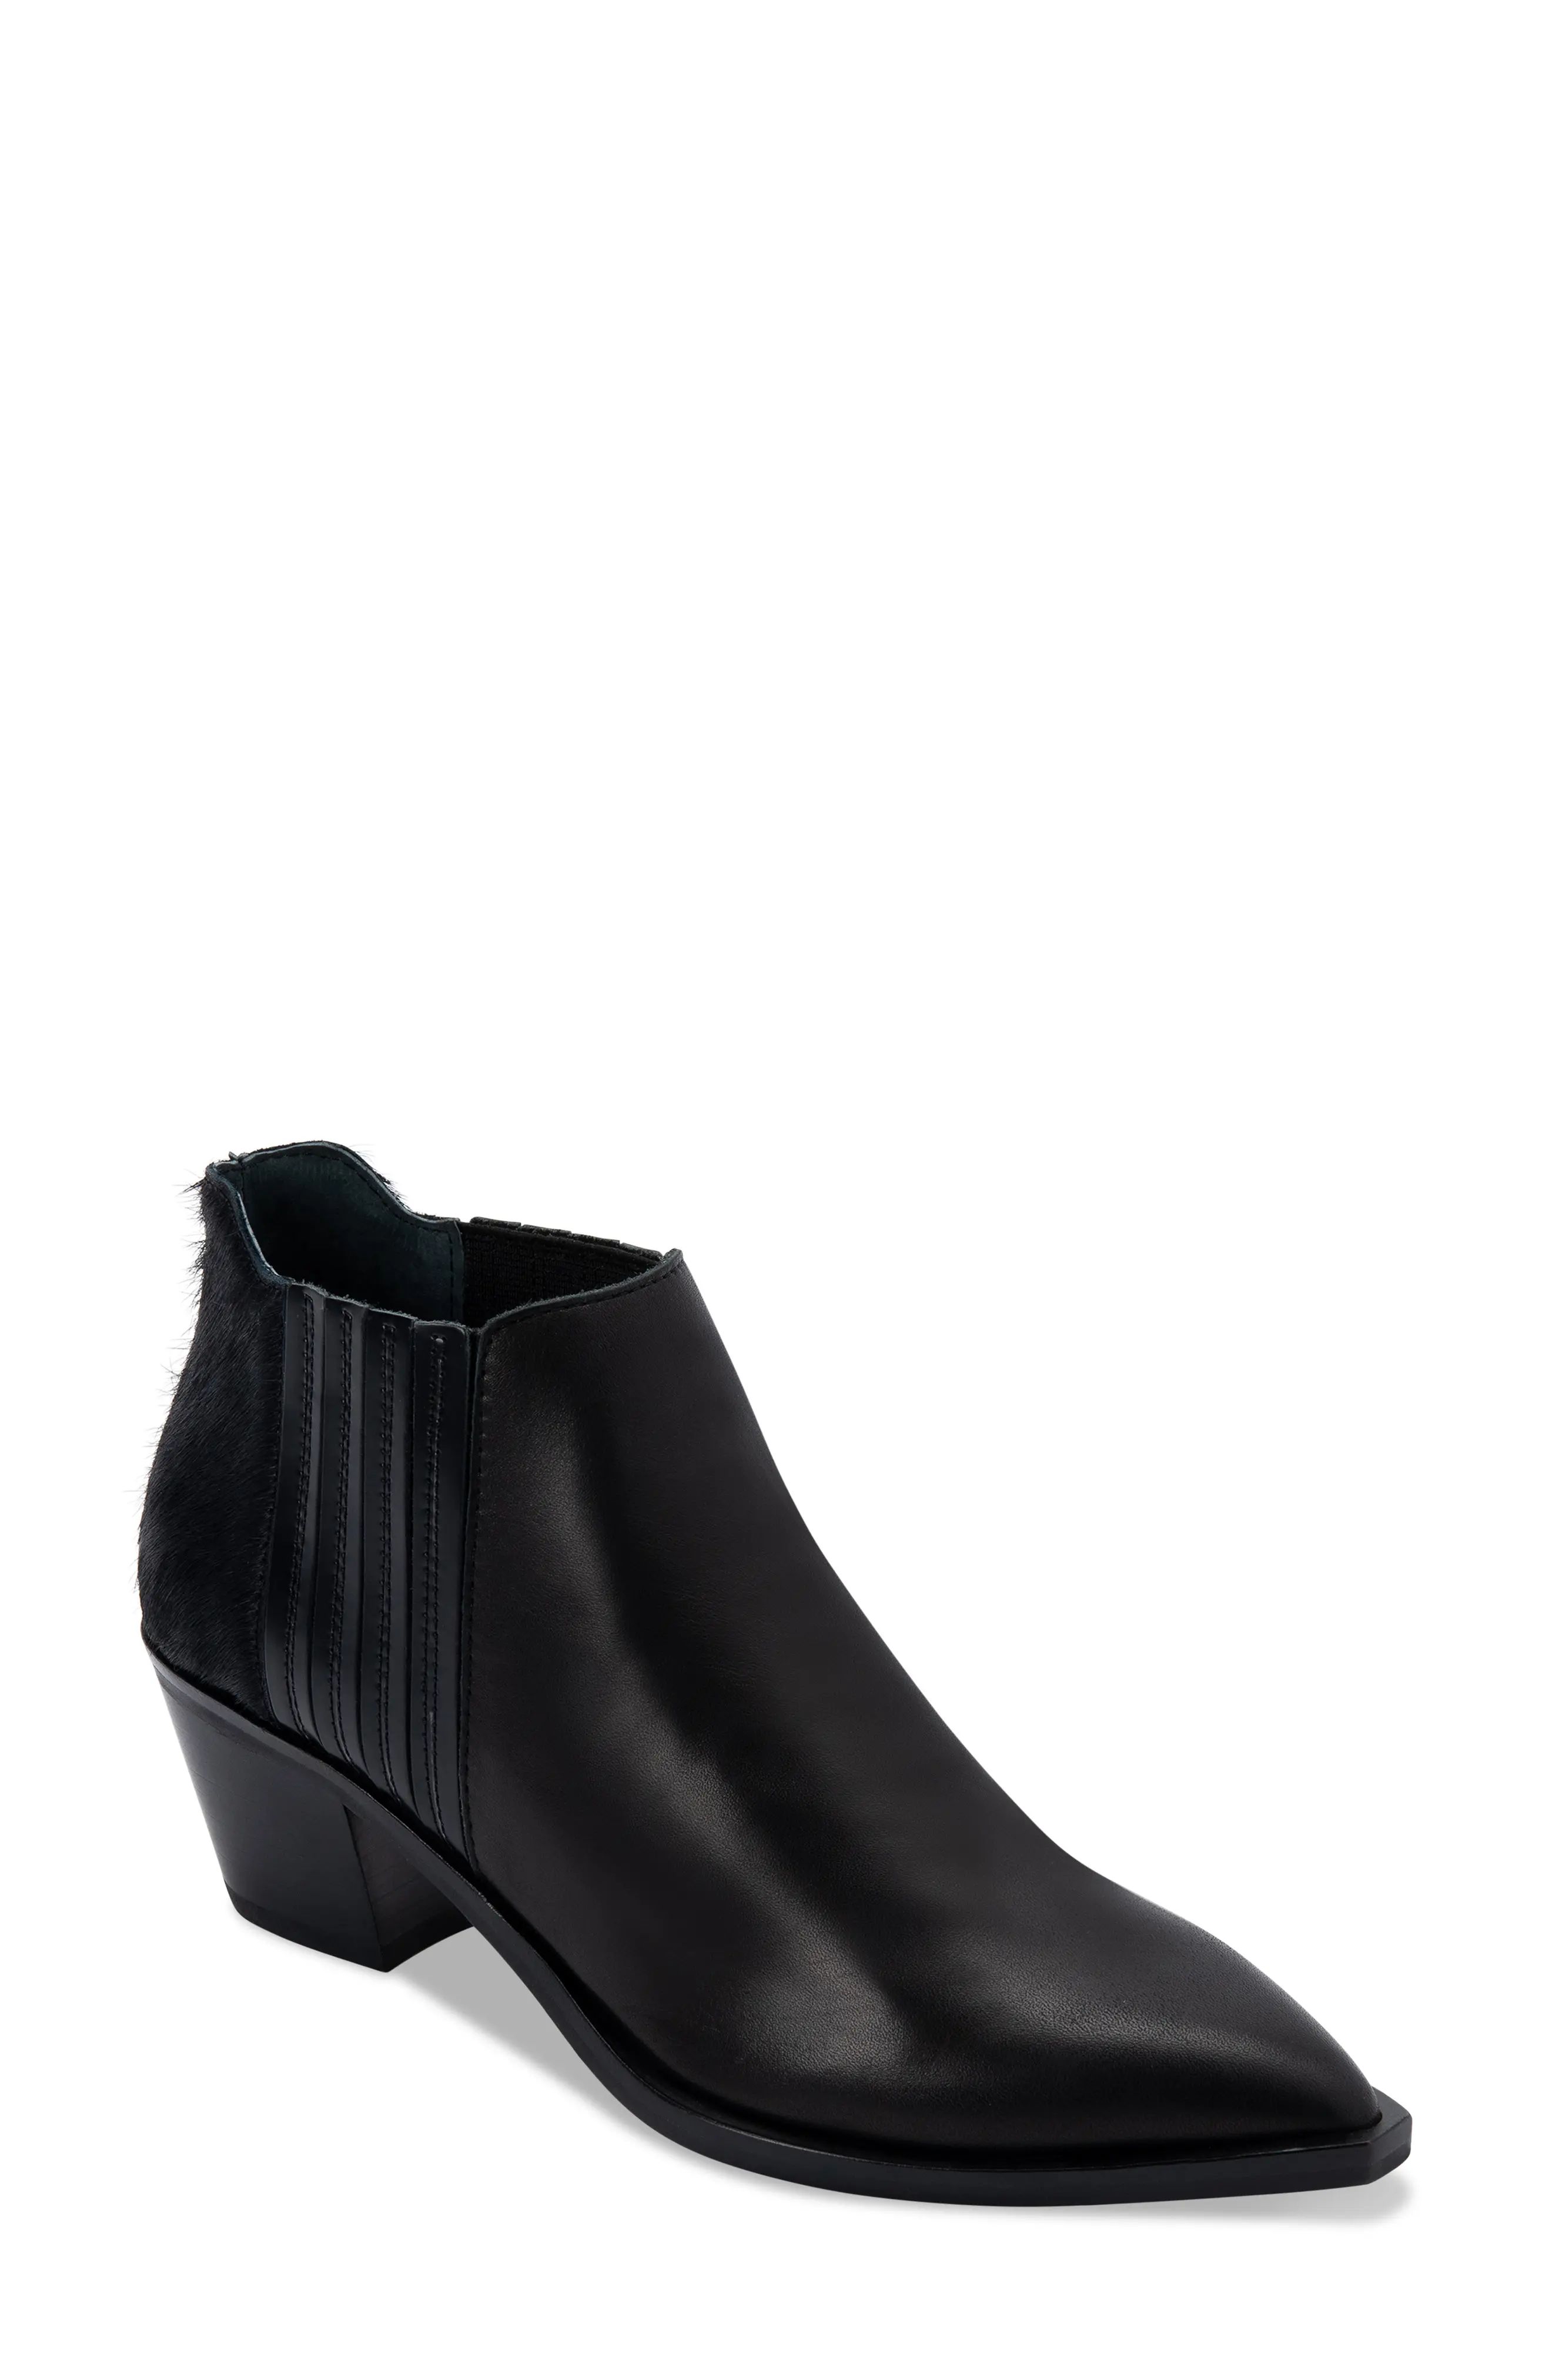 Women's Dolce Vita Shana Pointed Toe Ankle Boot, Size 6.5 M - Black | Nordstrom